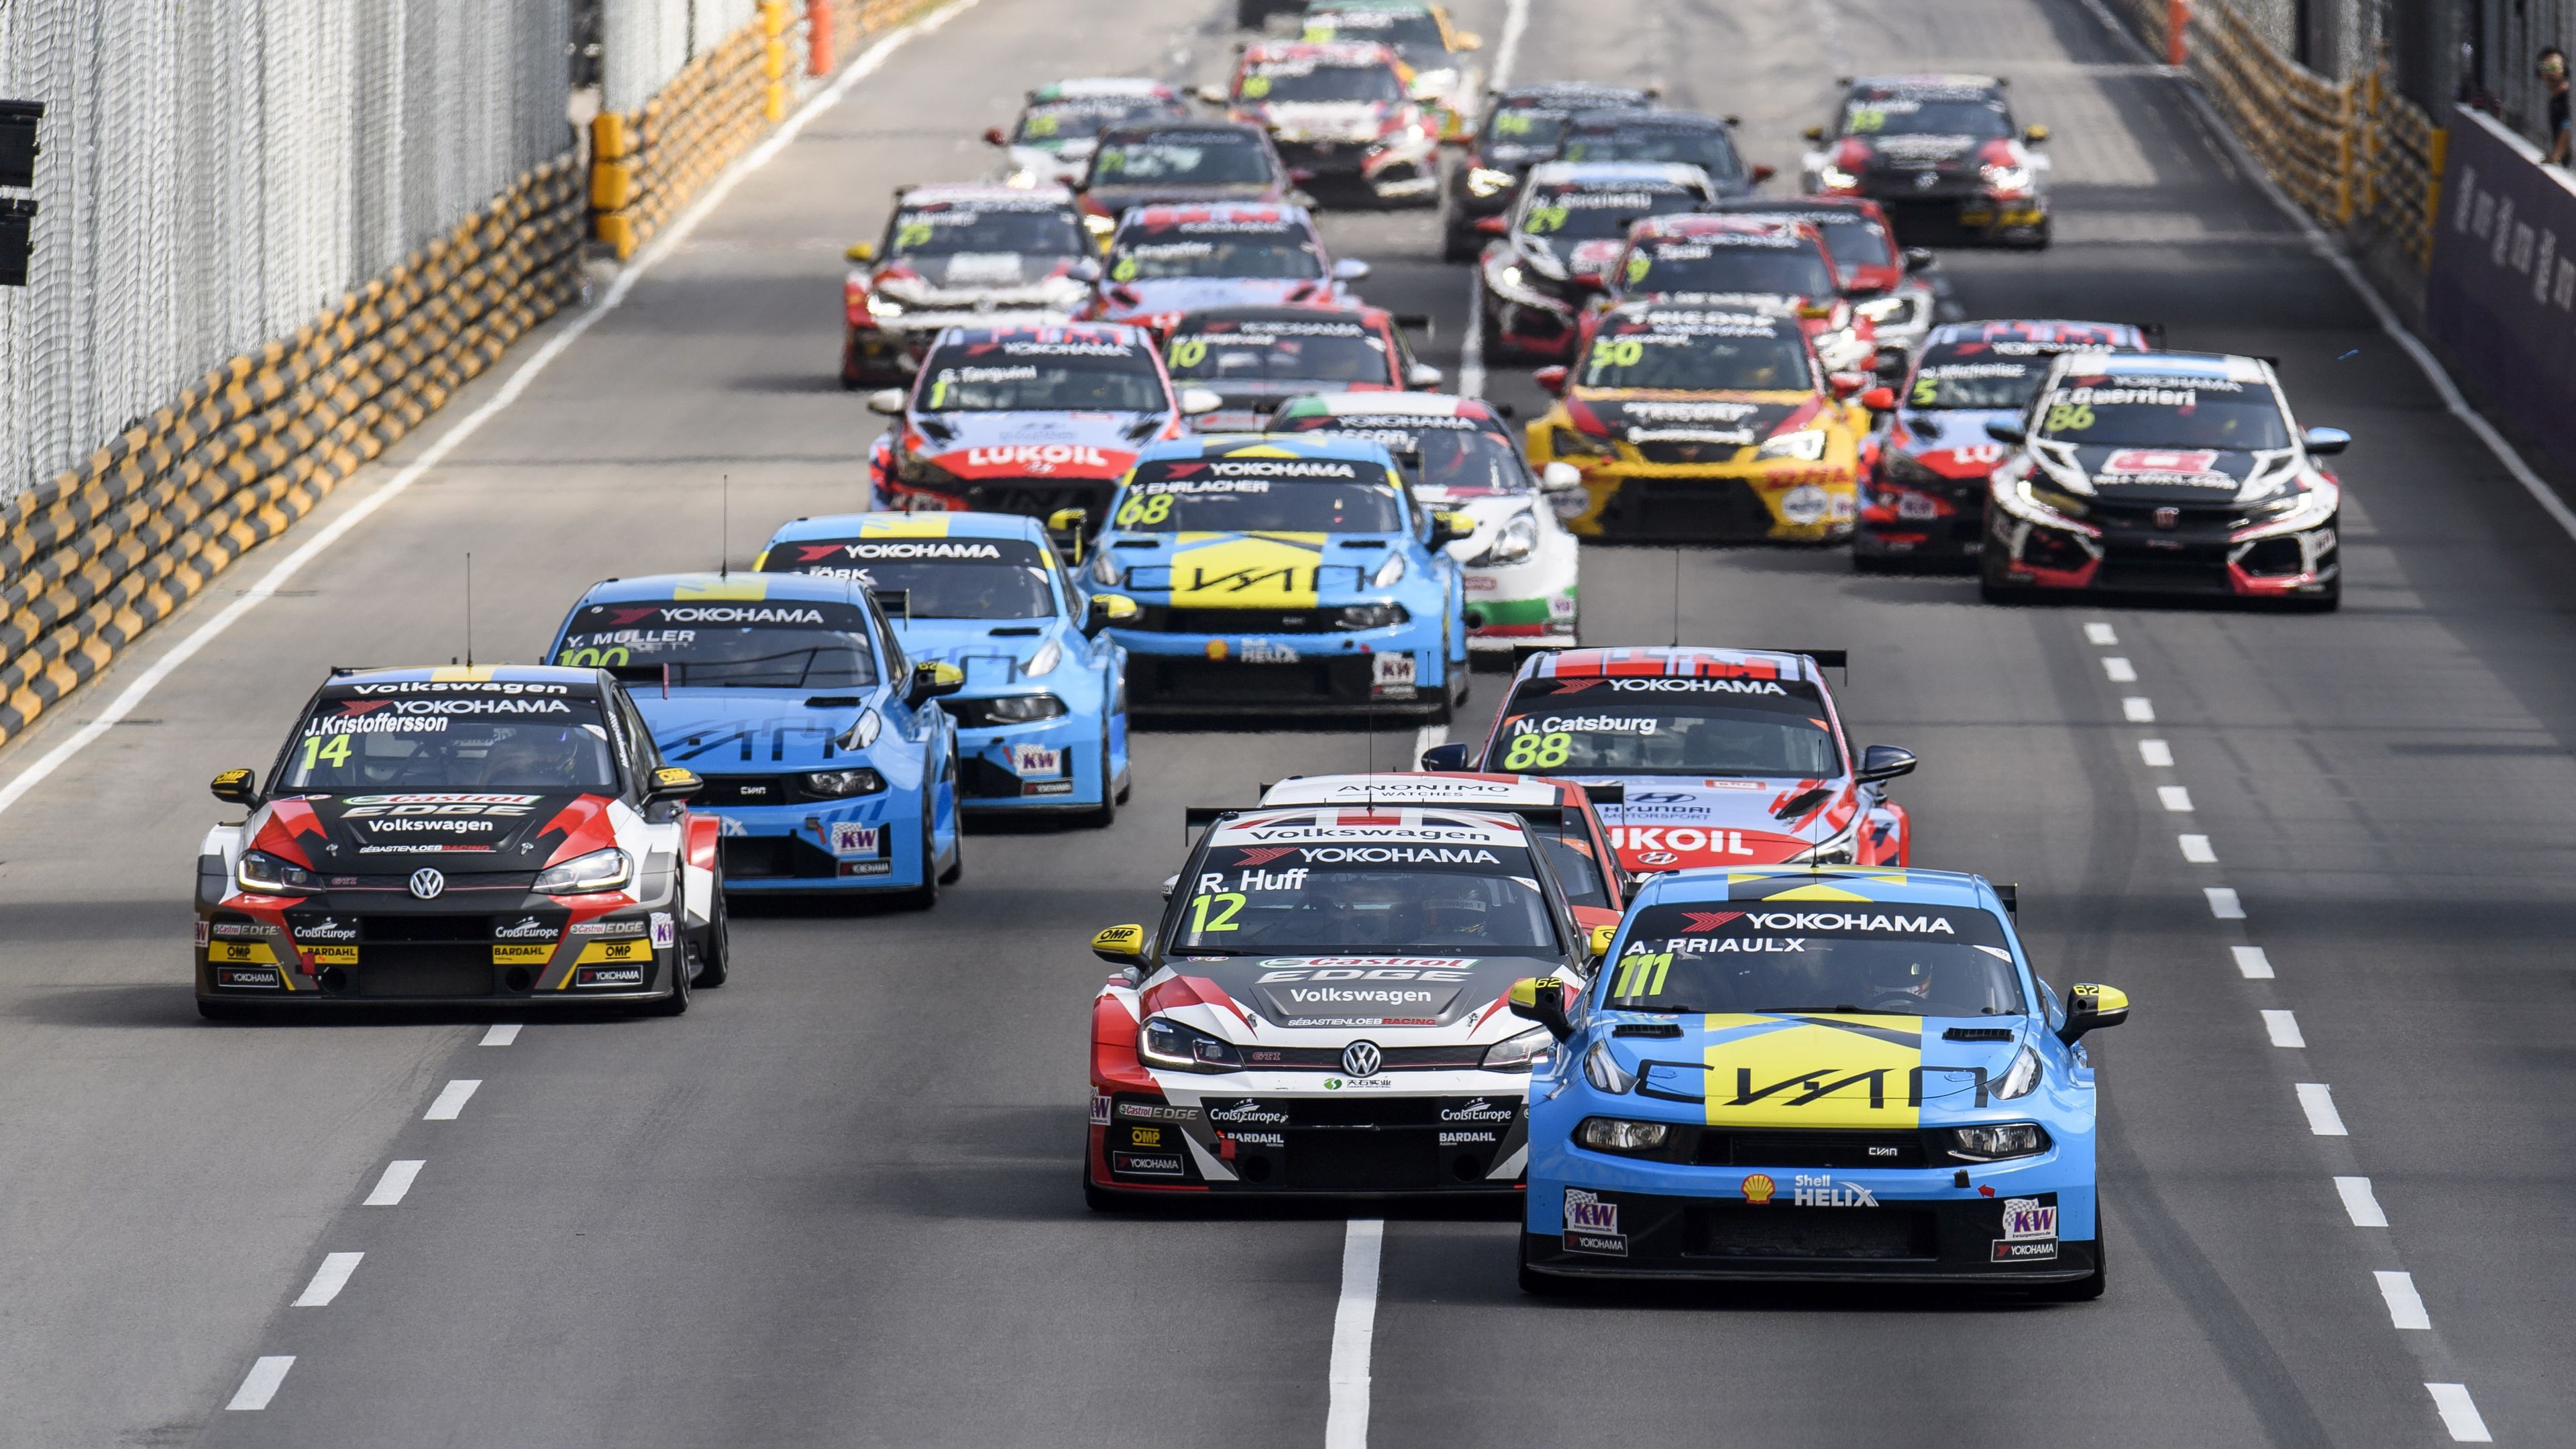 The start of the 2019 WTCR race at the Macau Grand Prix.